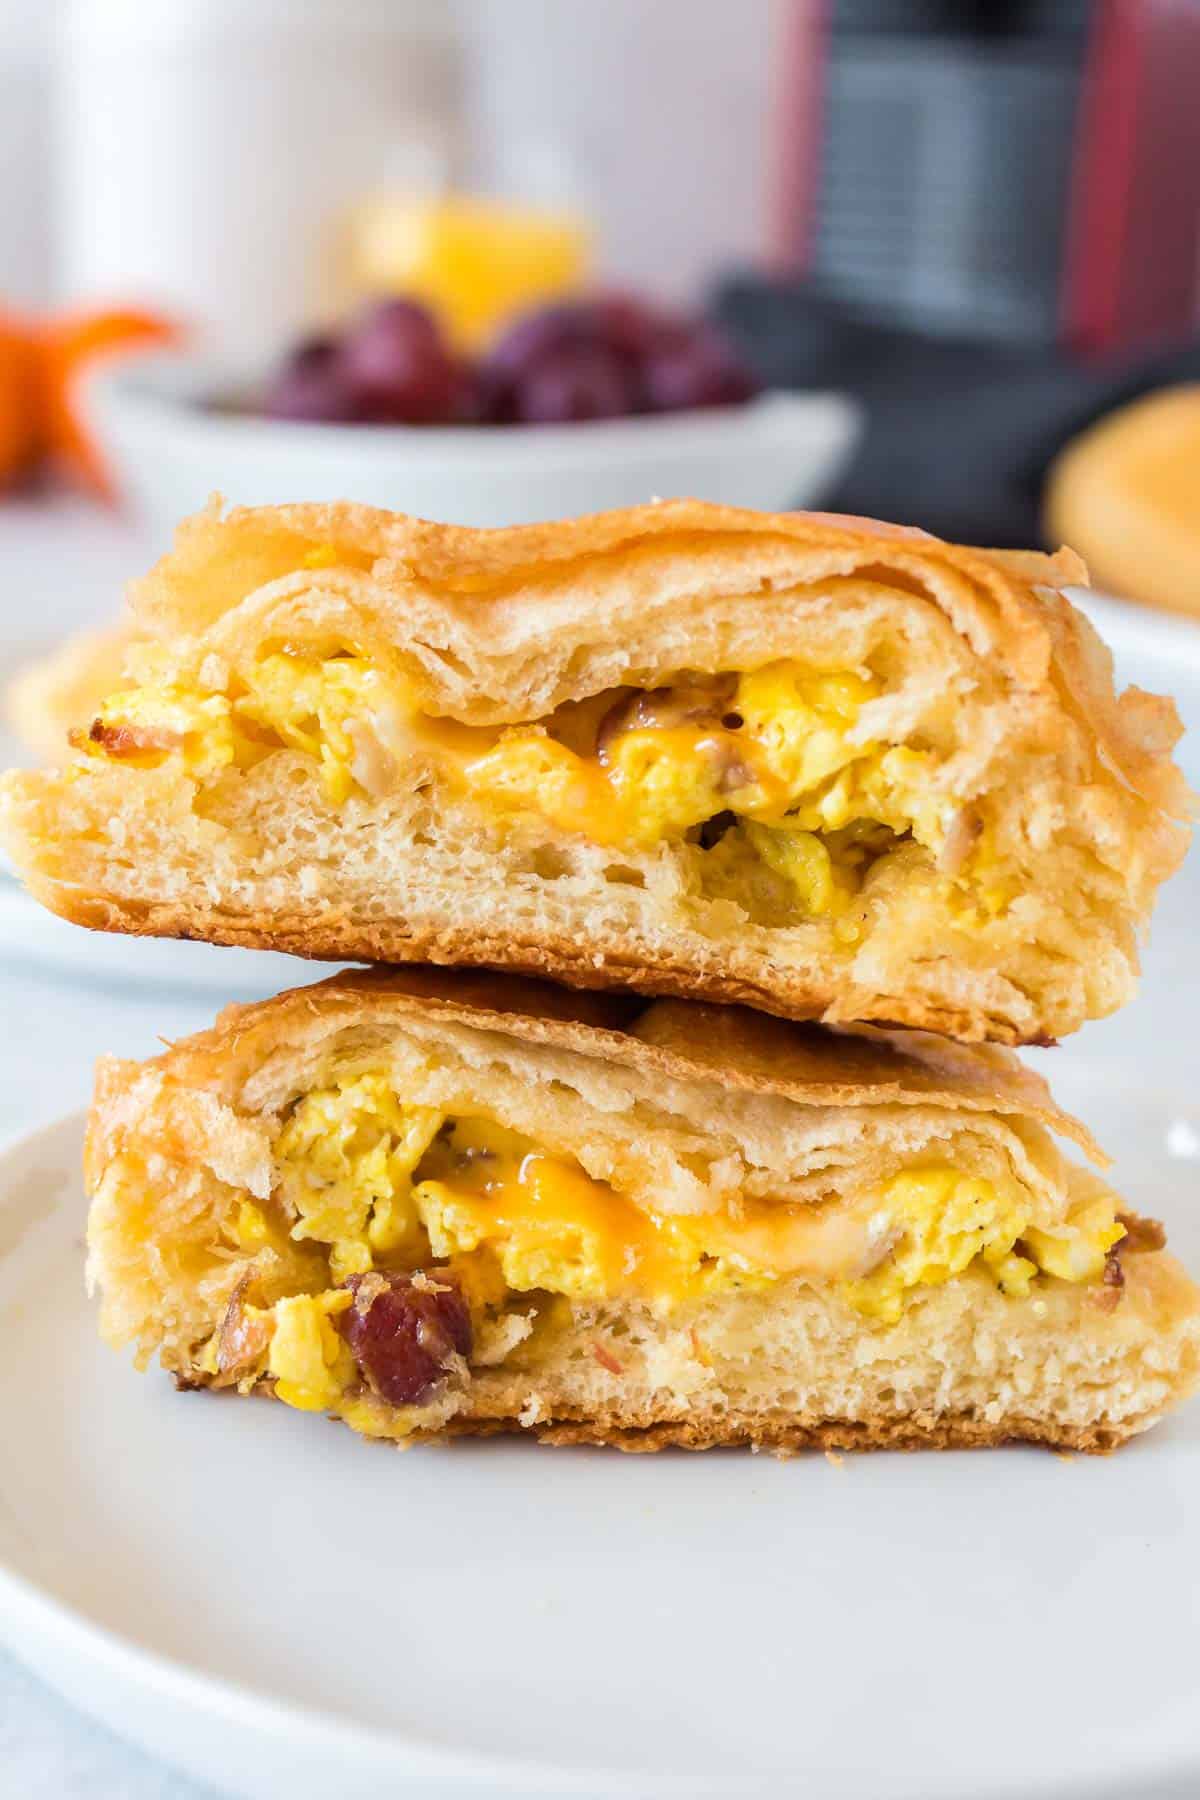 Biscuit split in half to show egg and cheese and meat filling.